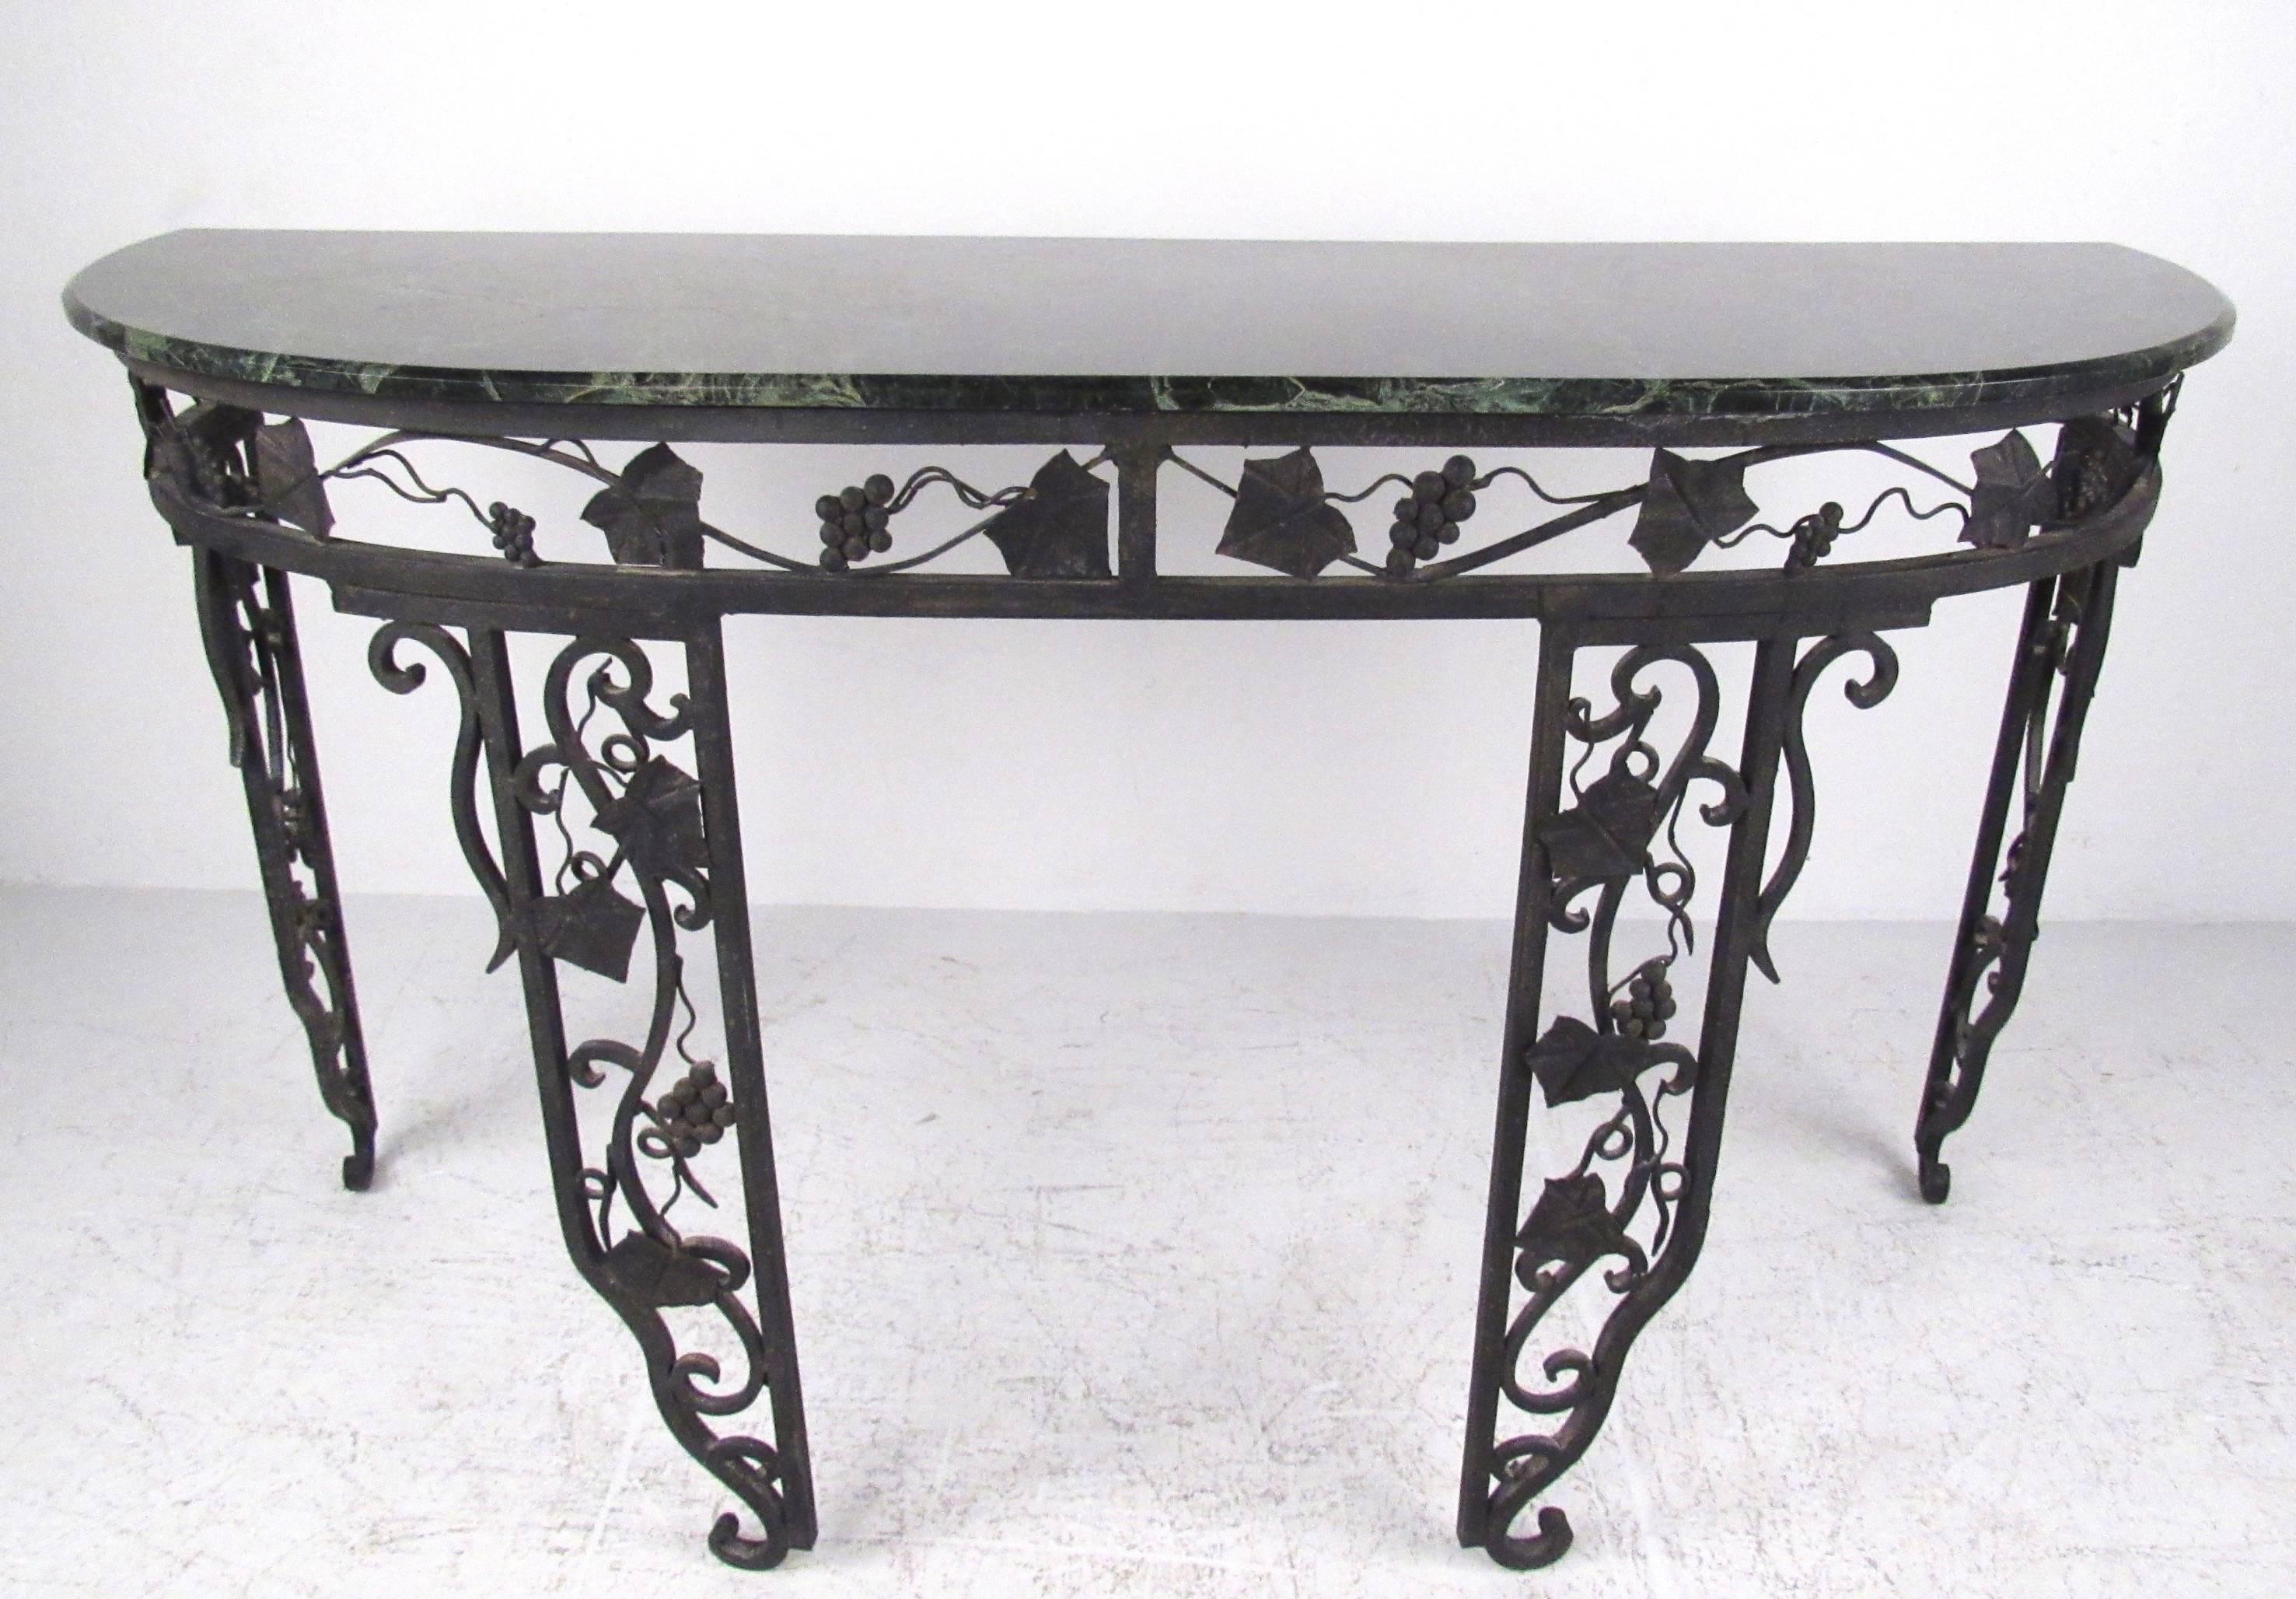 This ornate vintage demilune table features a heavy iron base paired with a marble top. Scrolled iron with vine and leaf motif add to the impressive appearance of the piece, making an excellent display table for hall or entryway. Two available,